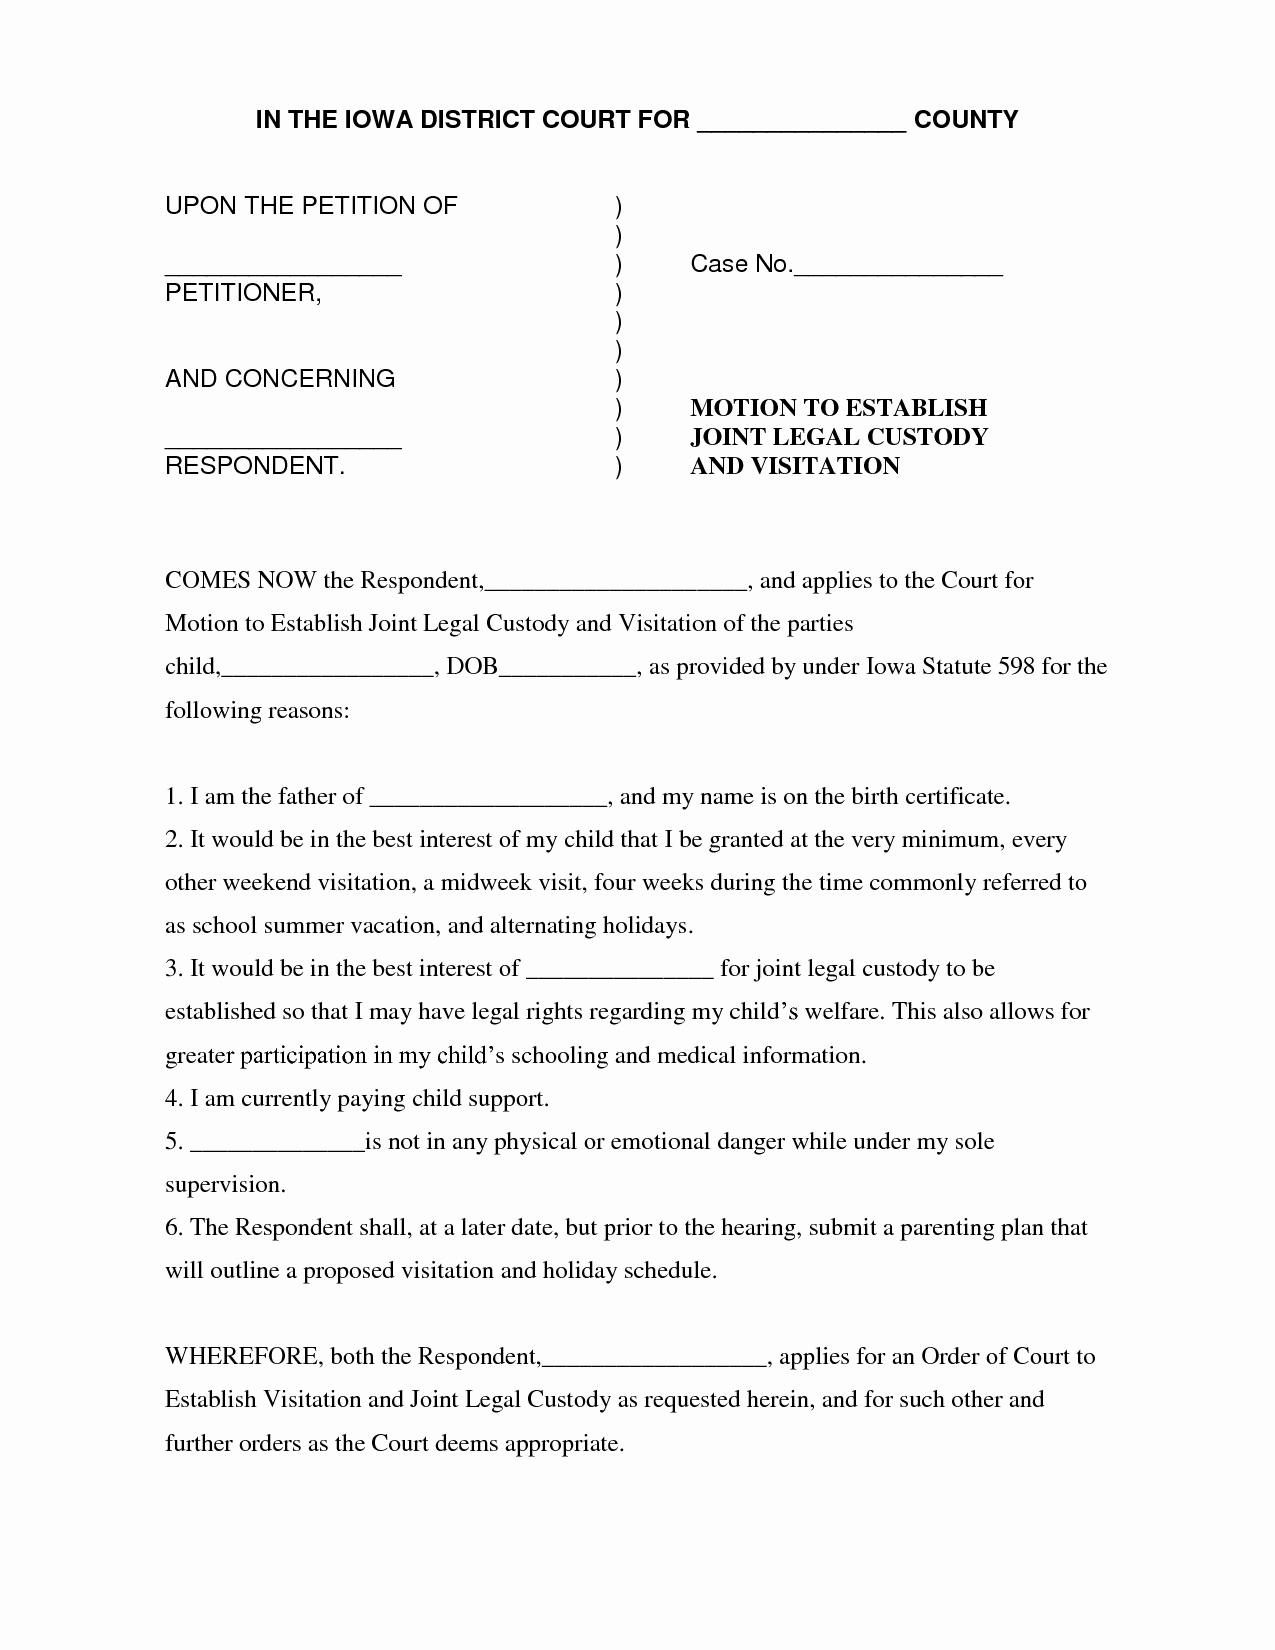 Child Custody Agreement Example Inspirational Best S Of Sample Motions Sample Of Motion to